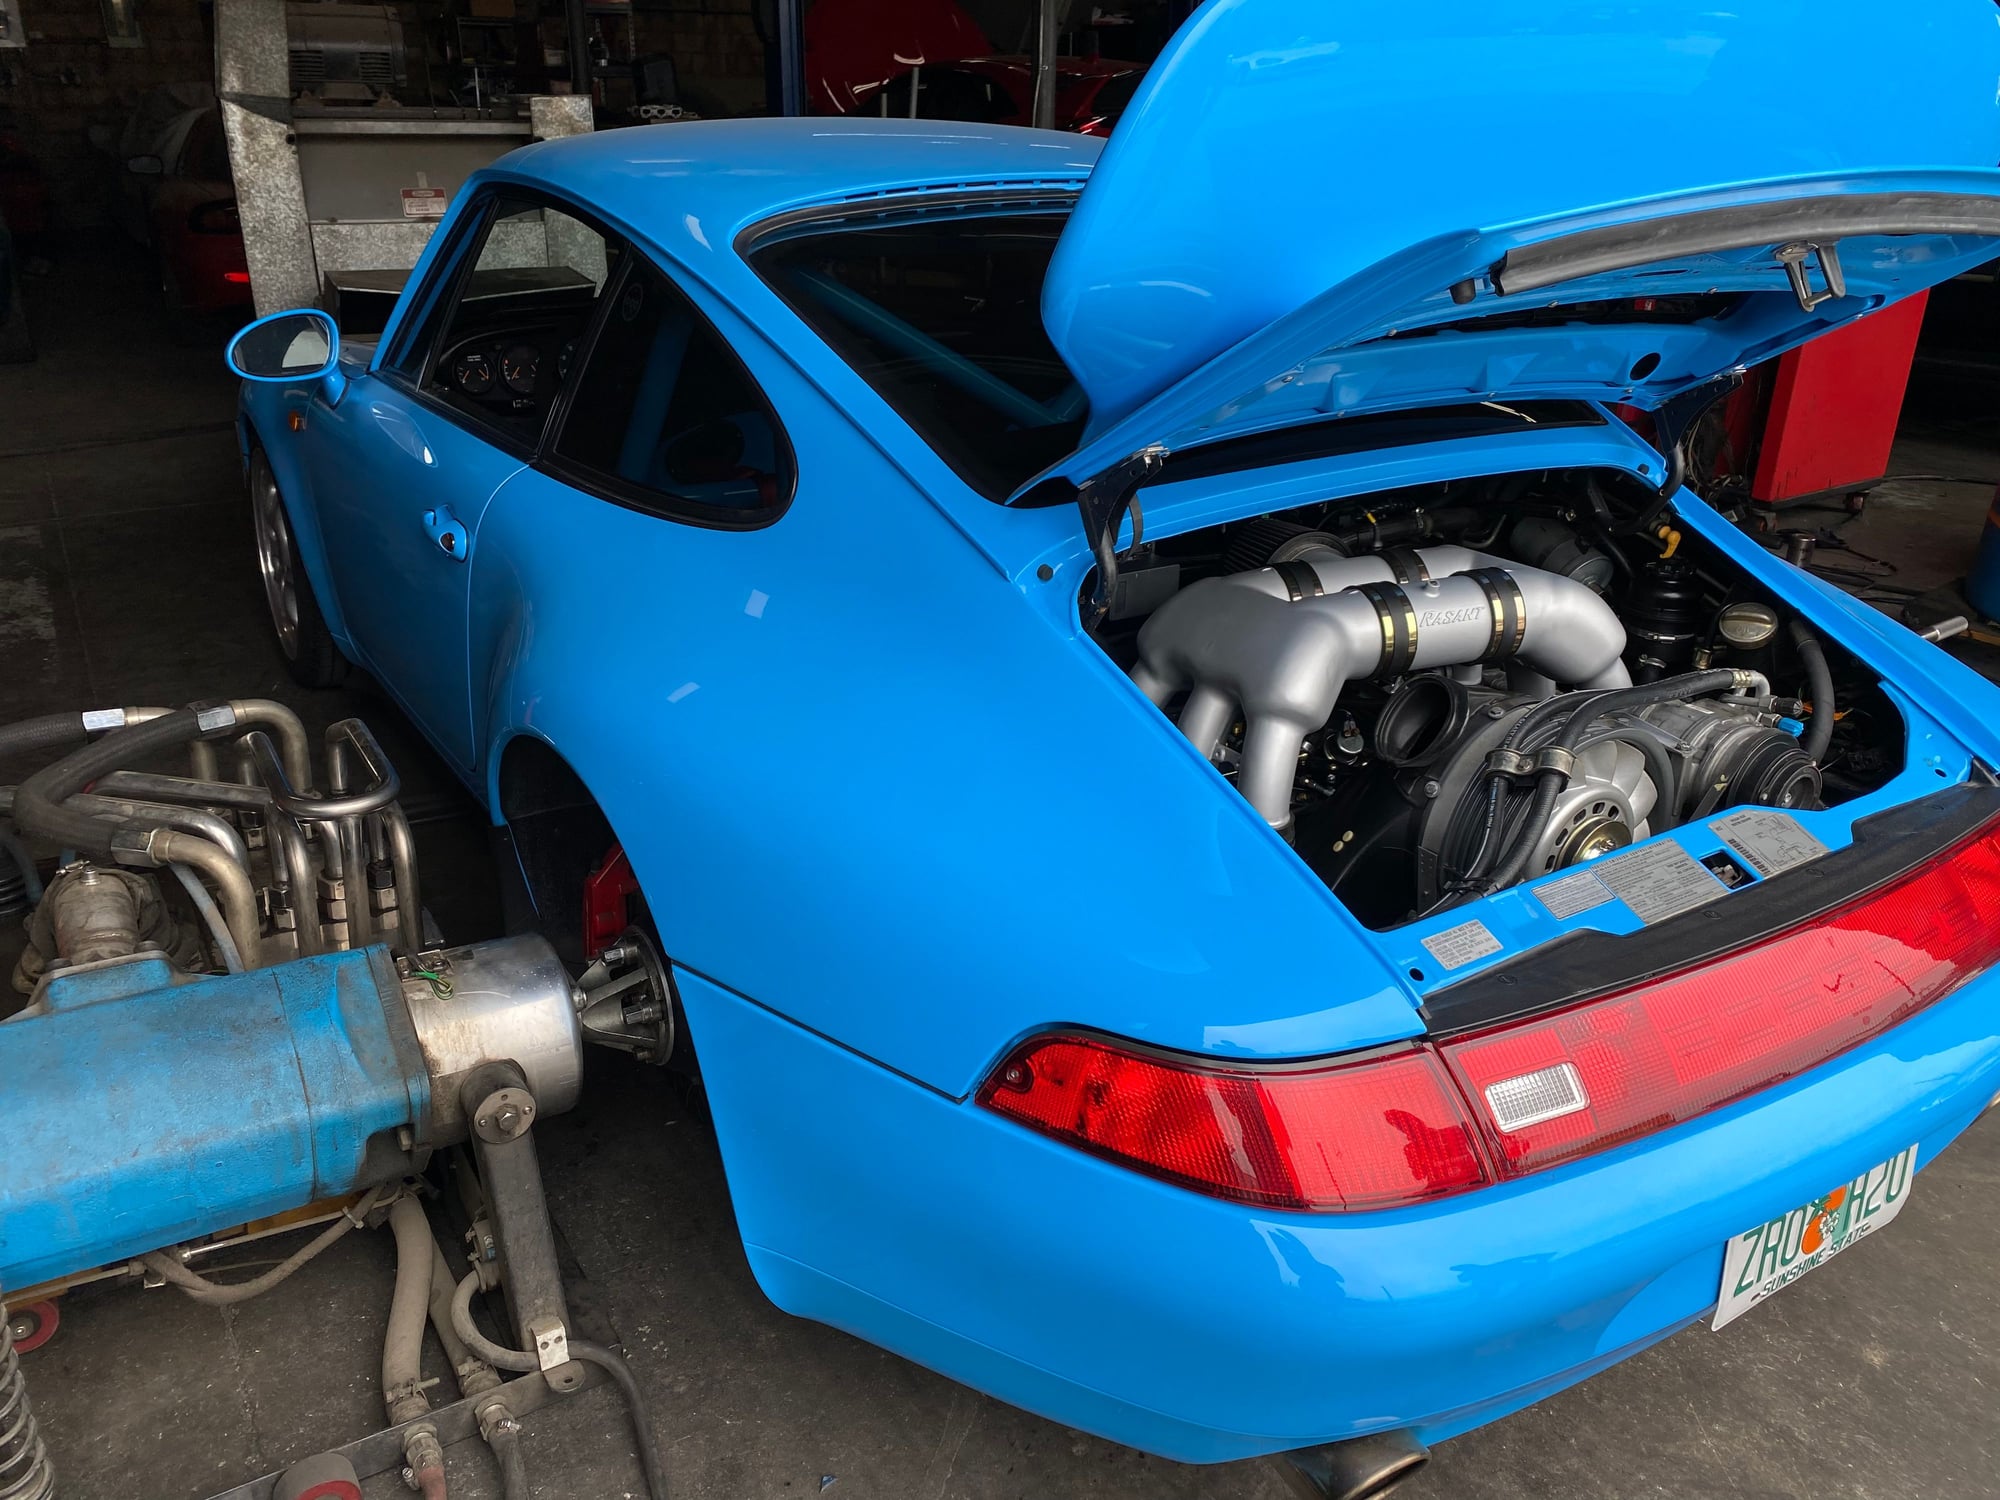 1995 Porsche 911 - 1995 Carrera RS Clone - Used - VIN WP0AA2999SS323842 - 7,200 Miles - 6 cyl - 2WD - Manual - Coupe - Blue - Melbourne, FL 32940, United States